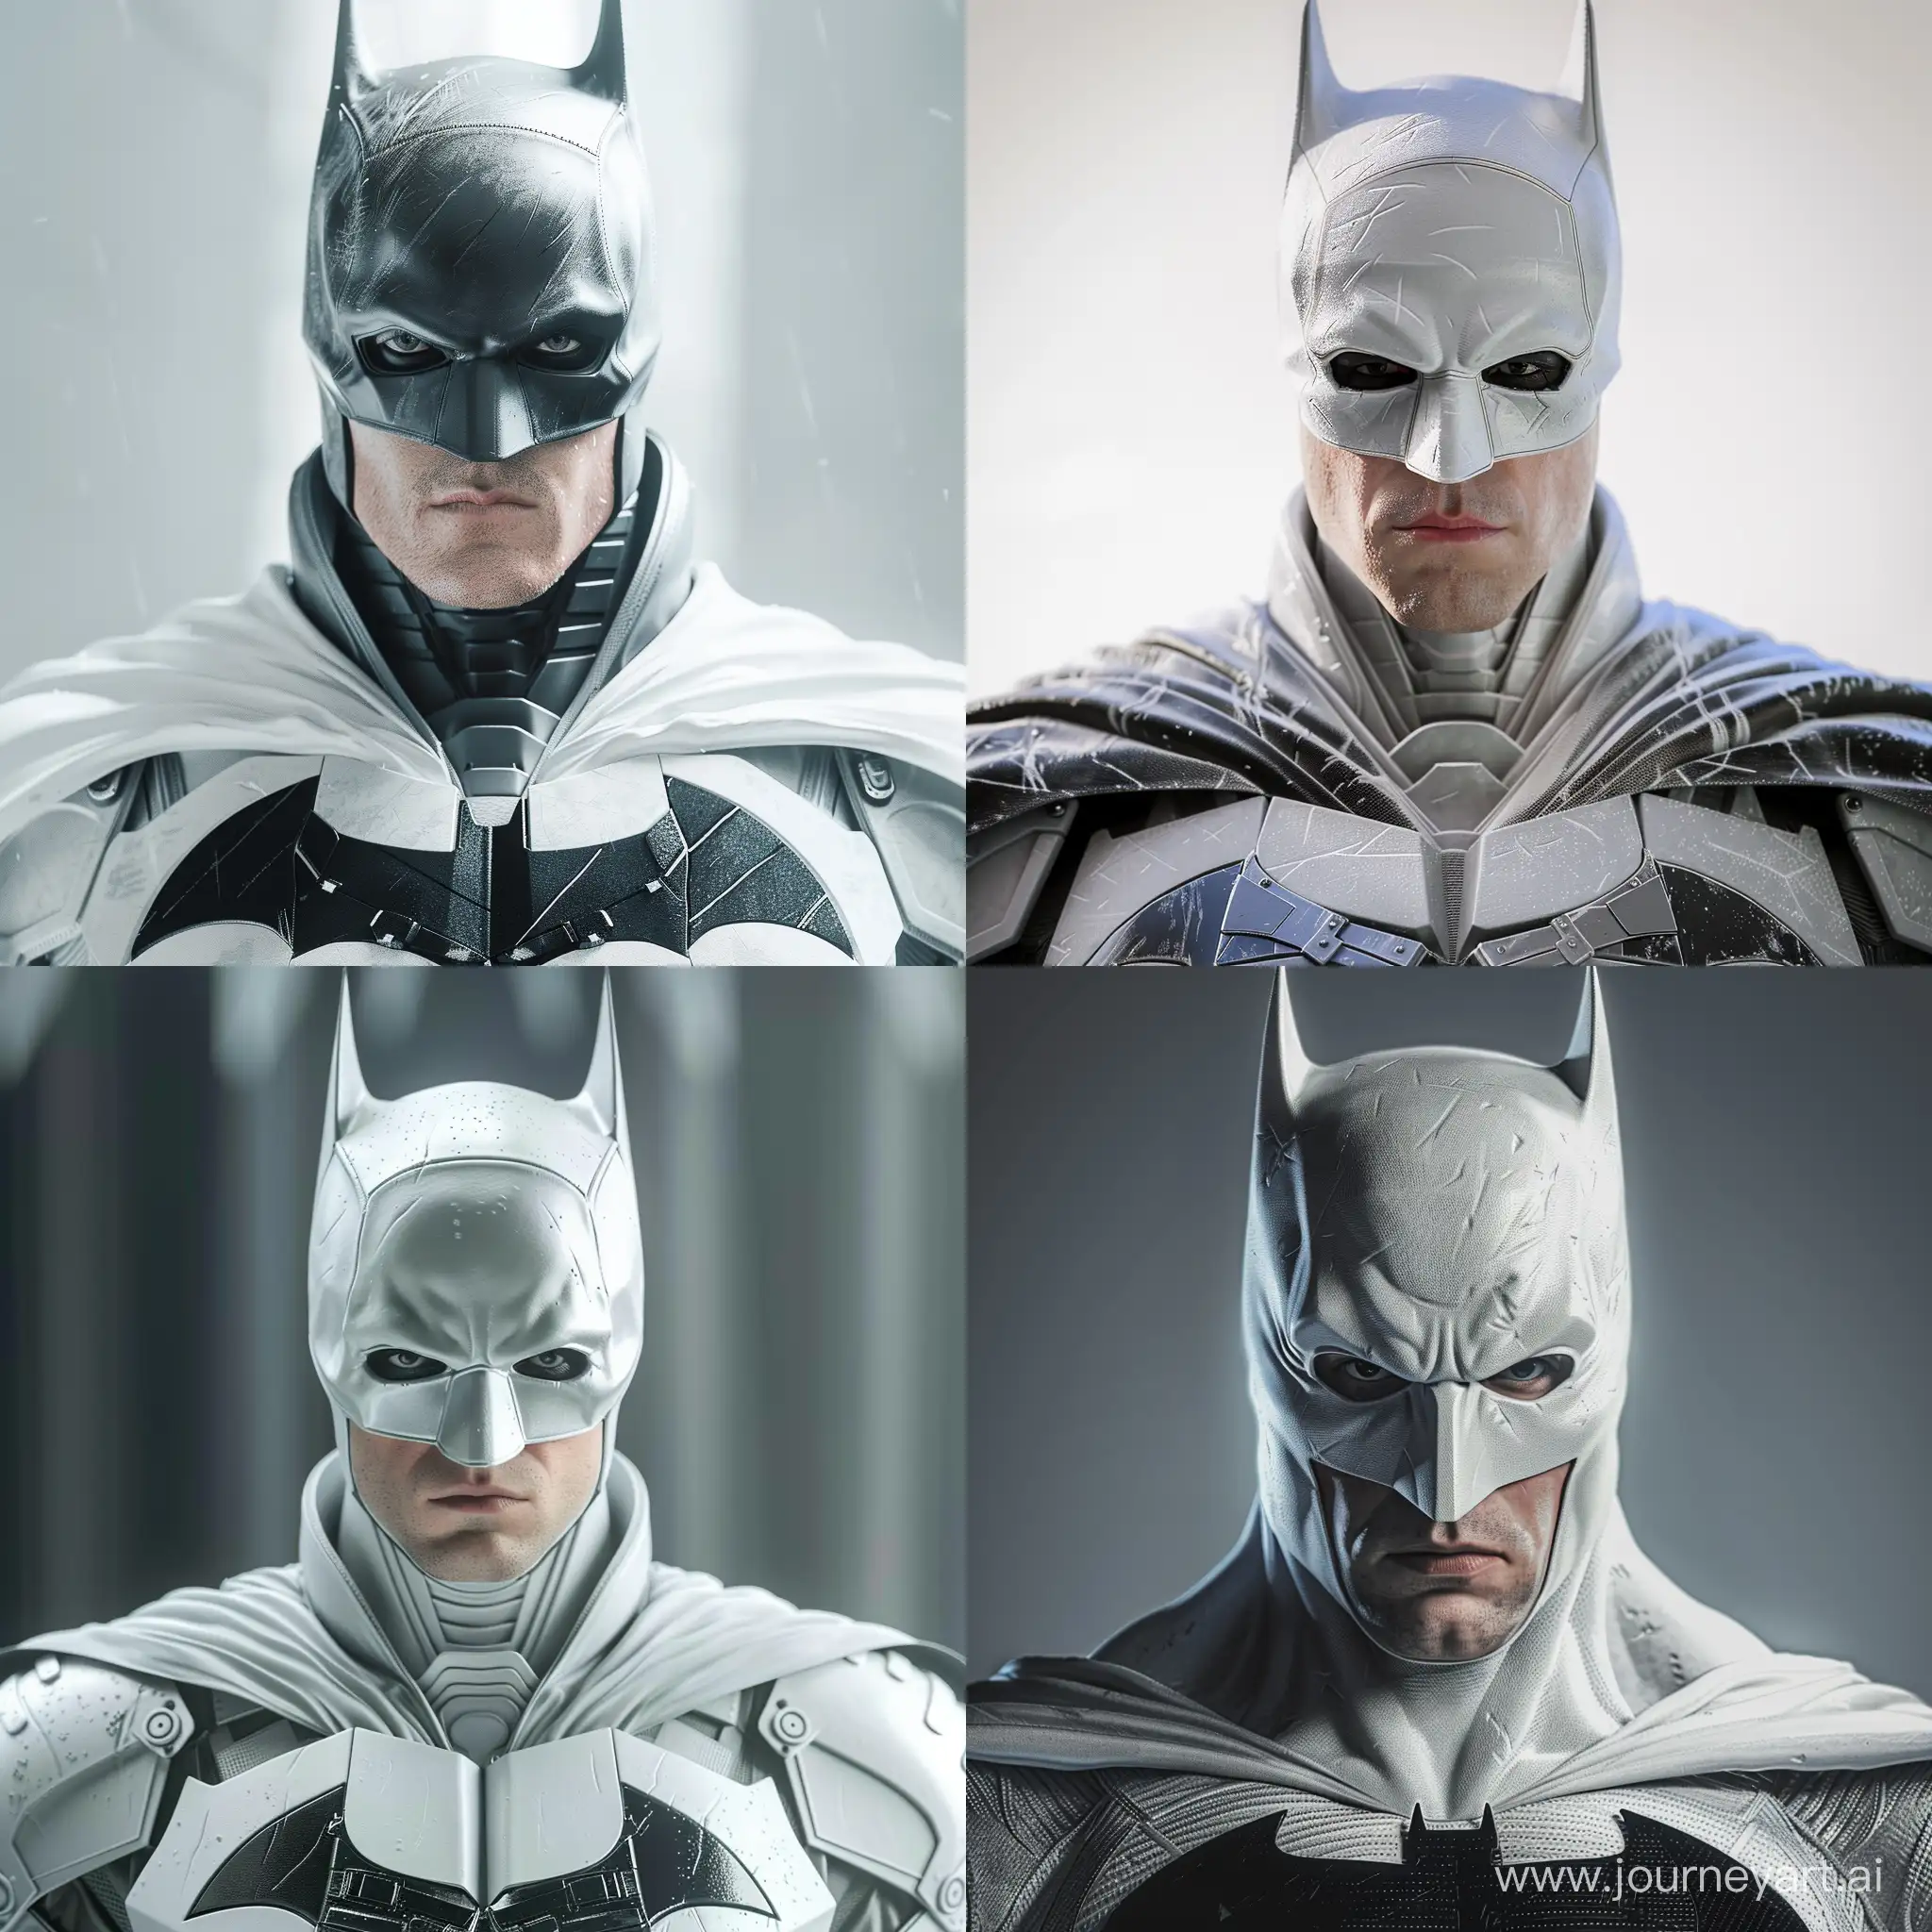 Christian Bale as Batman in White ultra-realistic, 8K UHD high resolution, with cinematic lighting